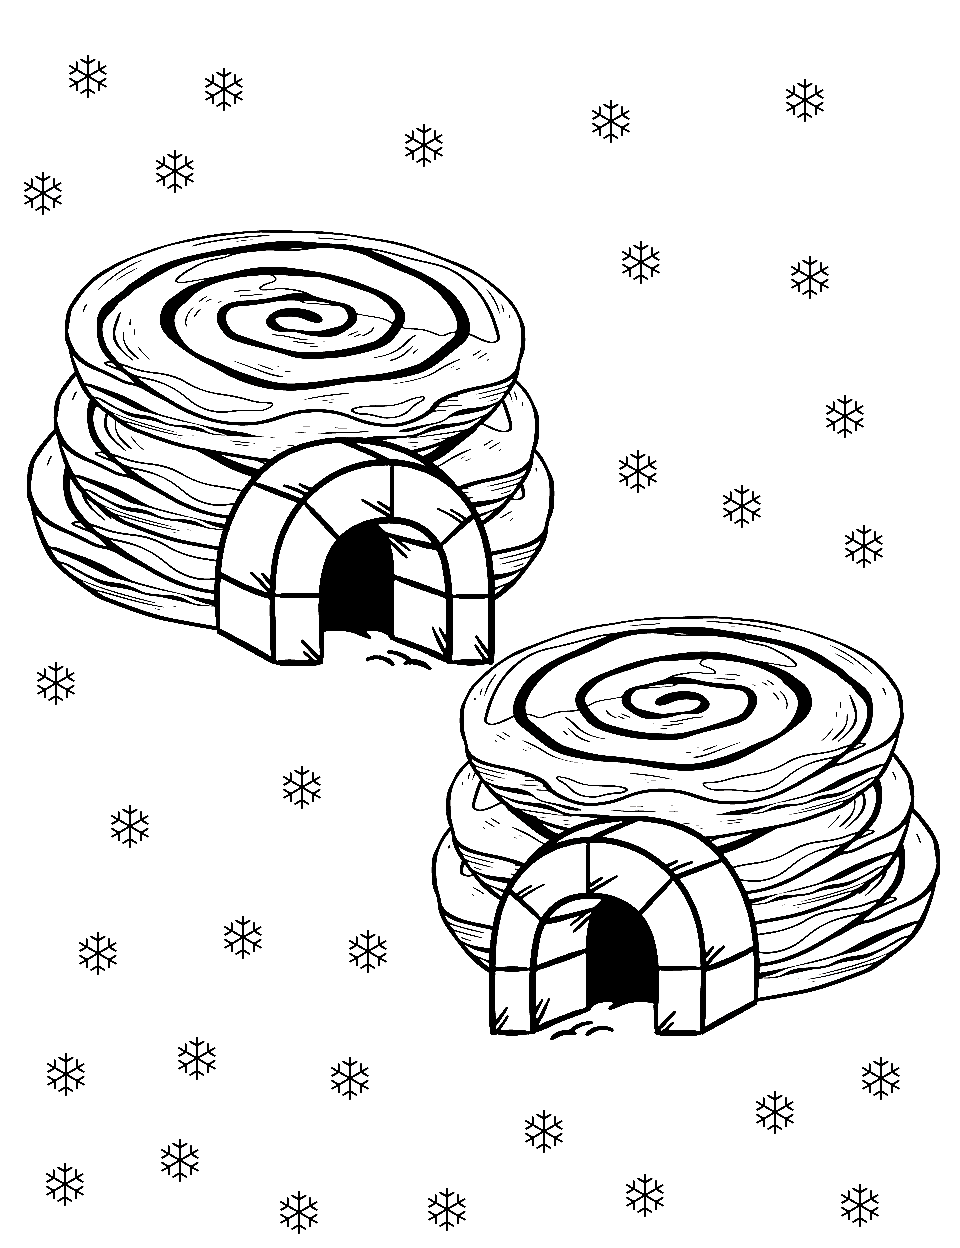 Arctic Expedition Donut Coloring Page - A depiction of the snow-covered Arctic with igloos shaped like donuts.